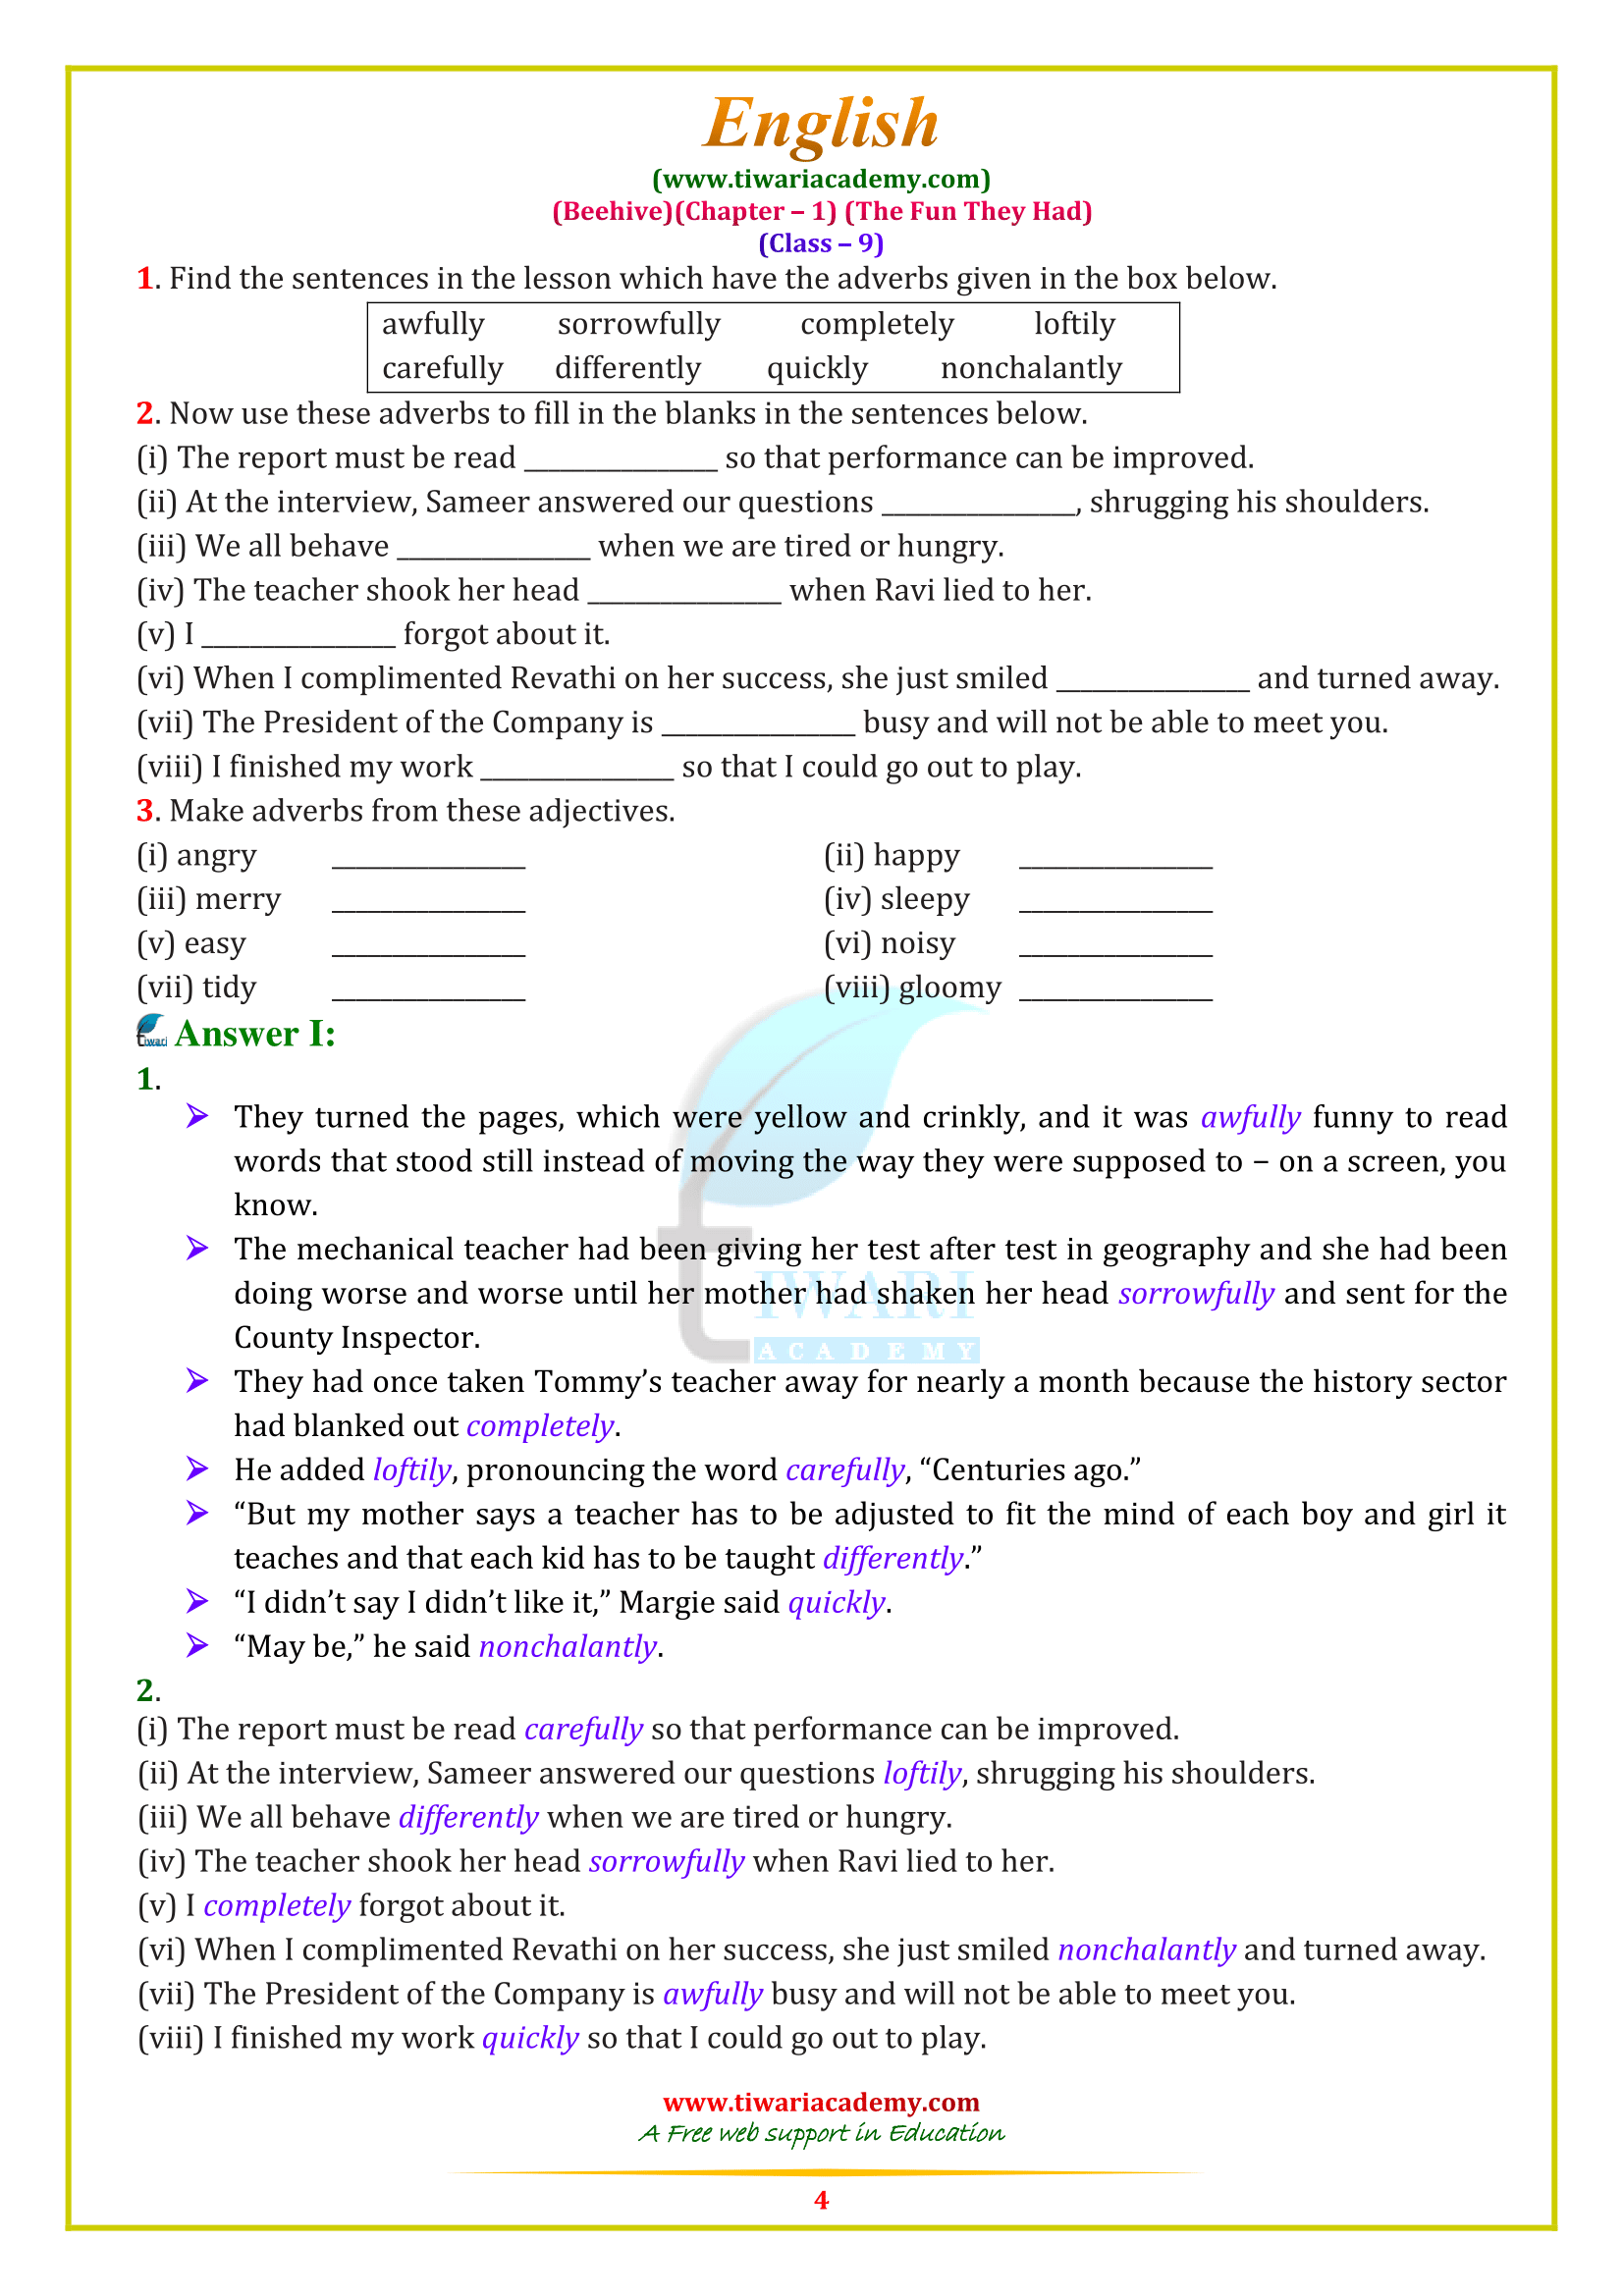 Chapter 1 Beehive answers